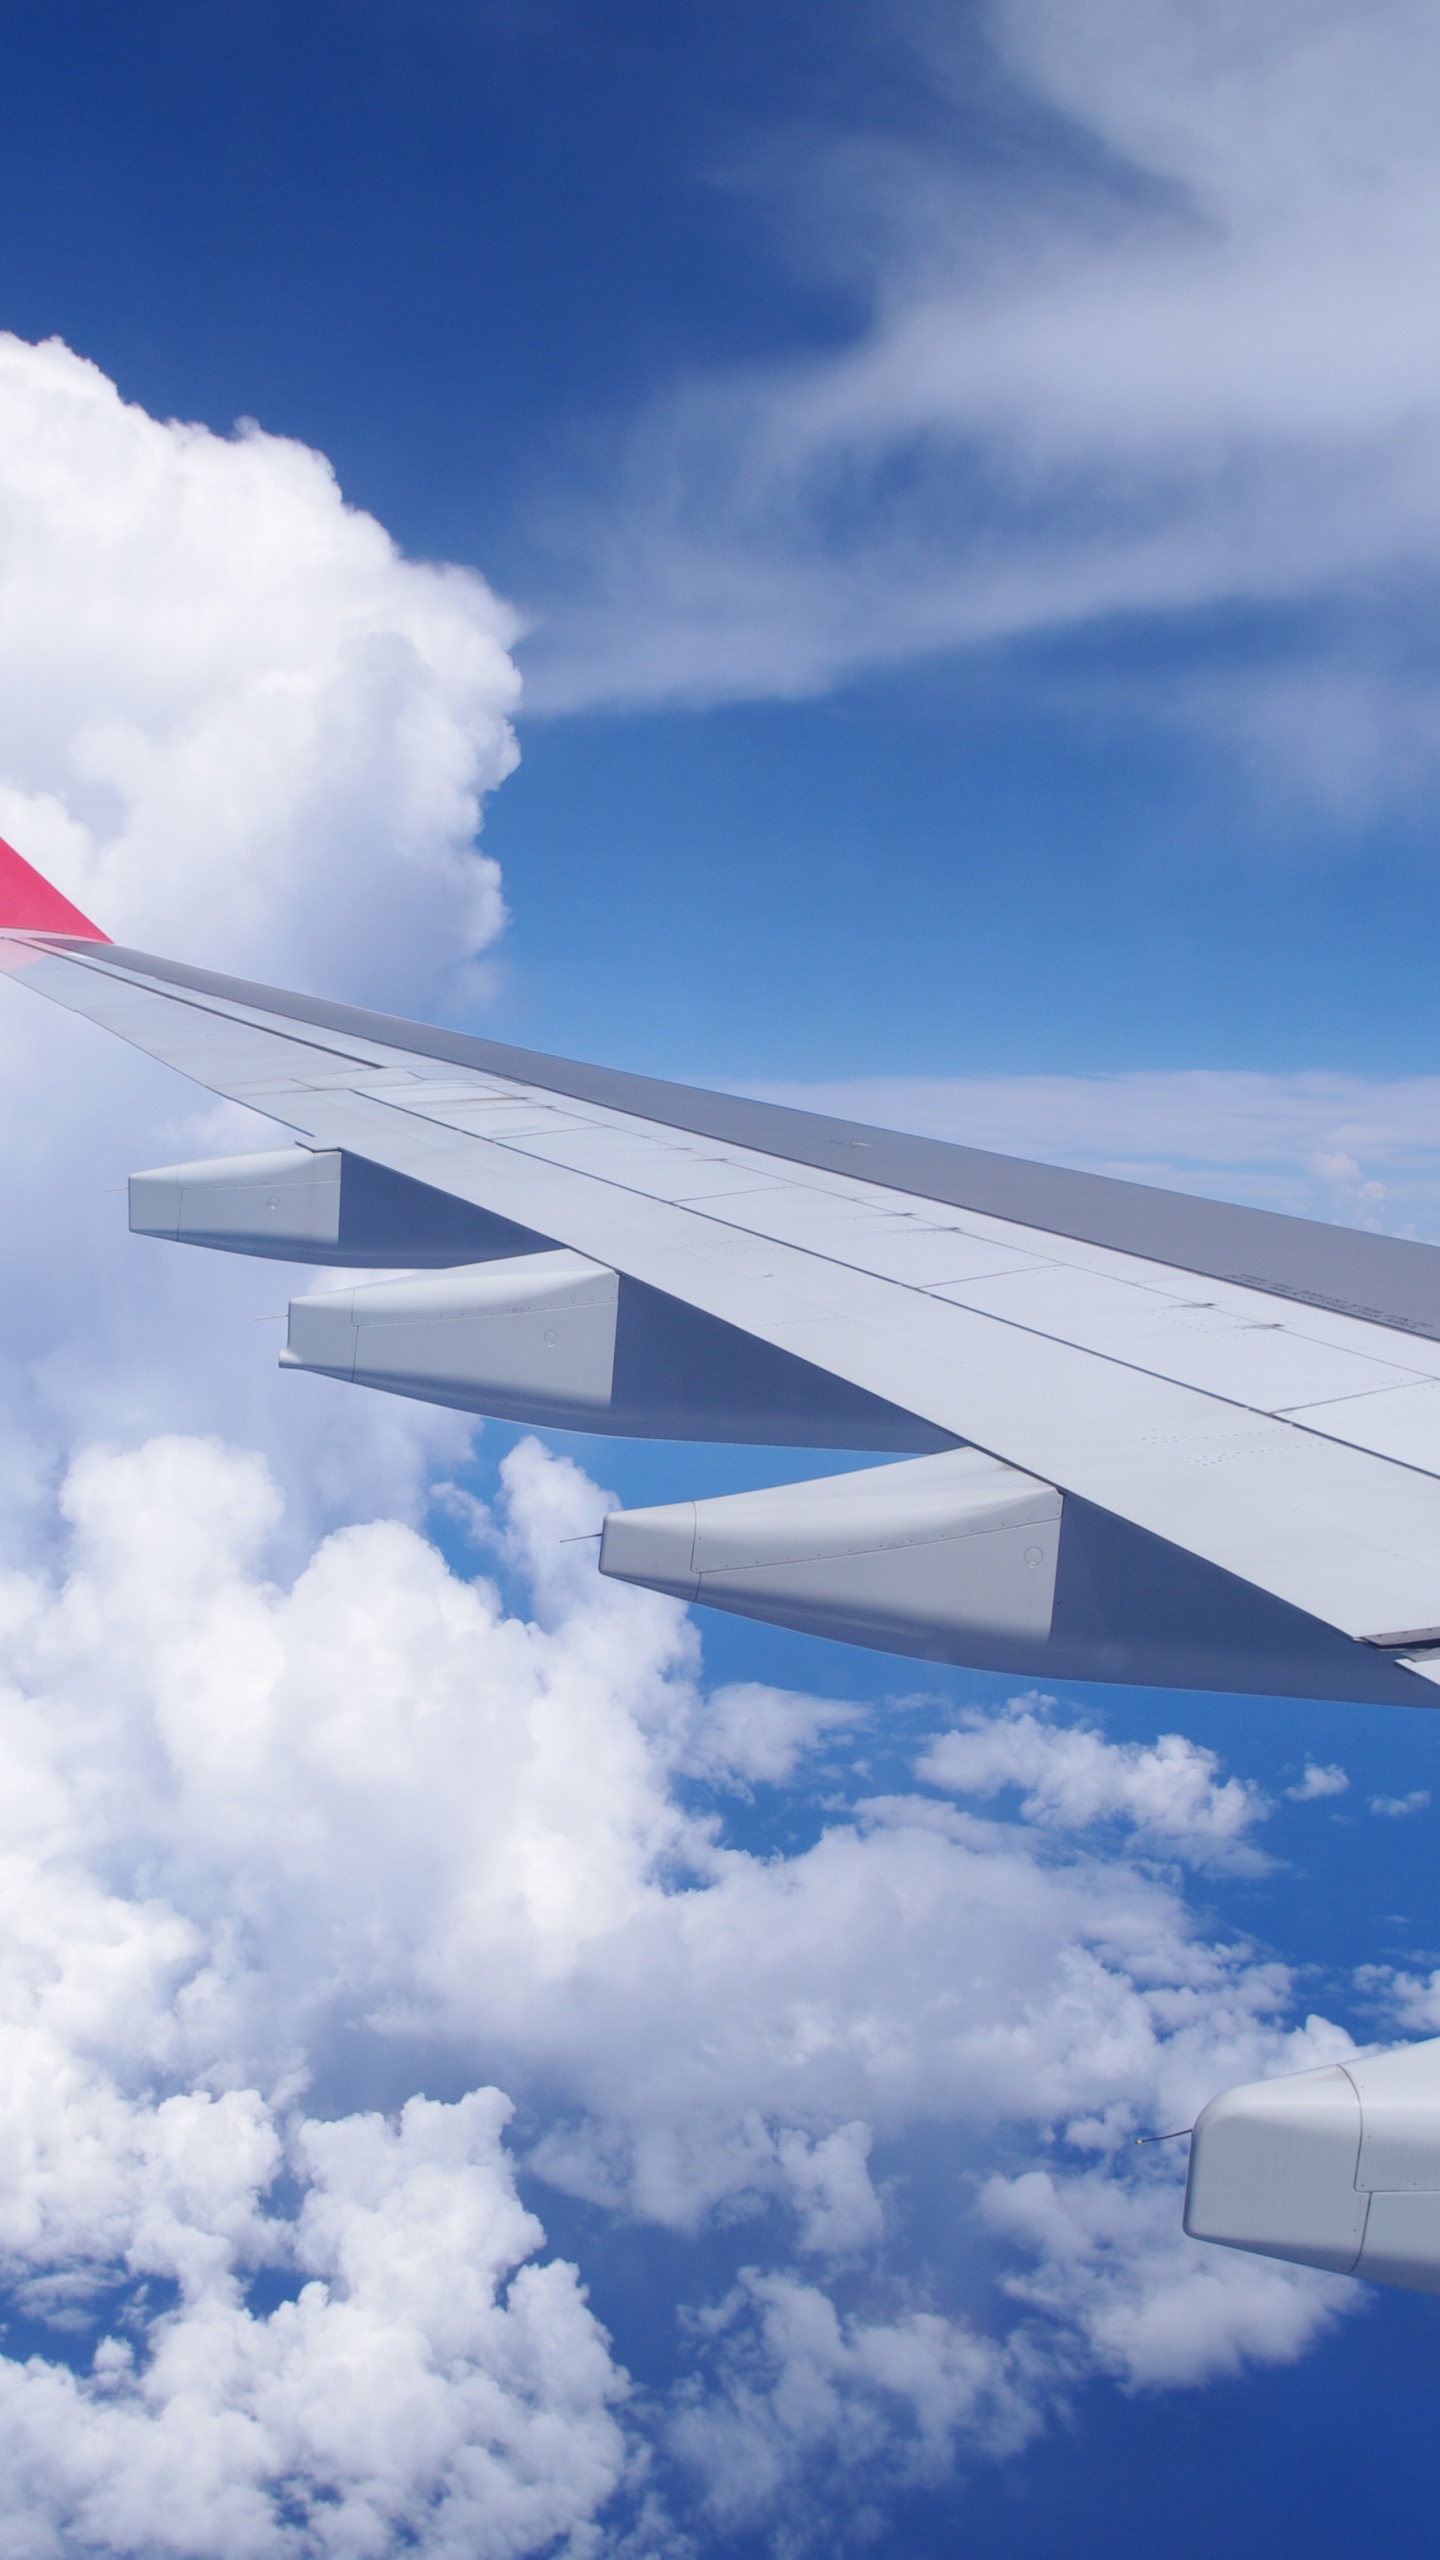 White and Red Airplane Wing Under Blue Sky and White Clouds During Daytime. Wallpaper in 1440x2560 Resolution